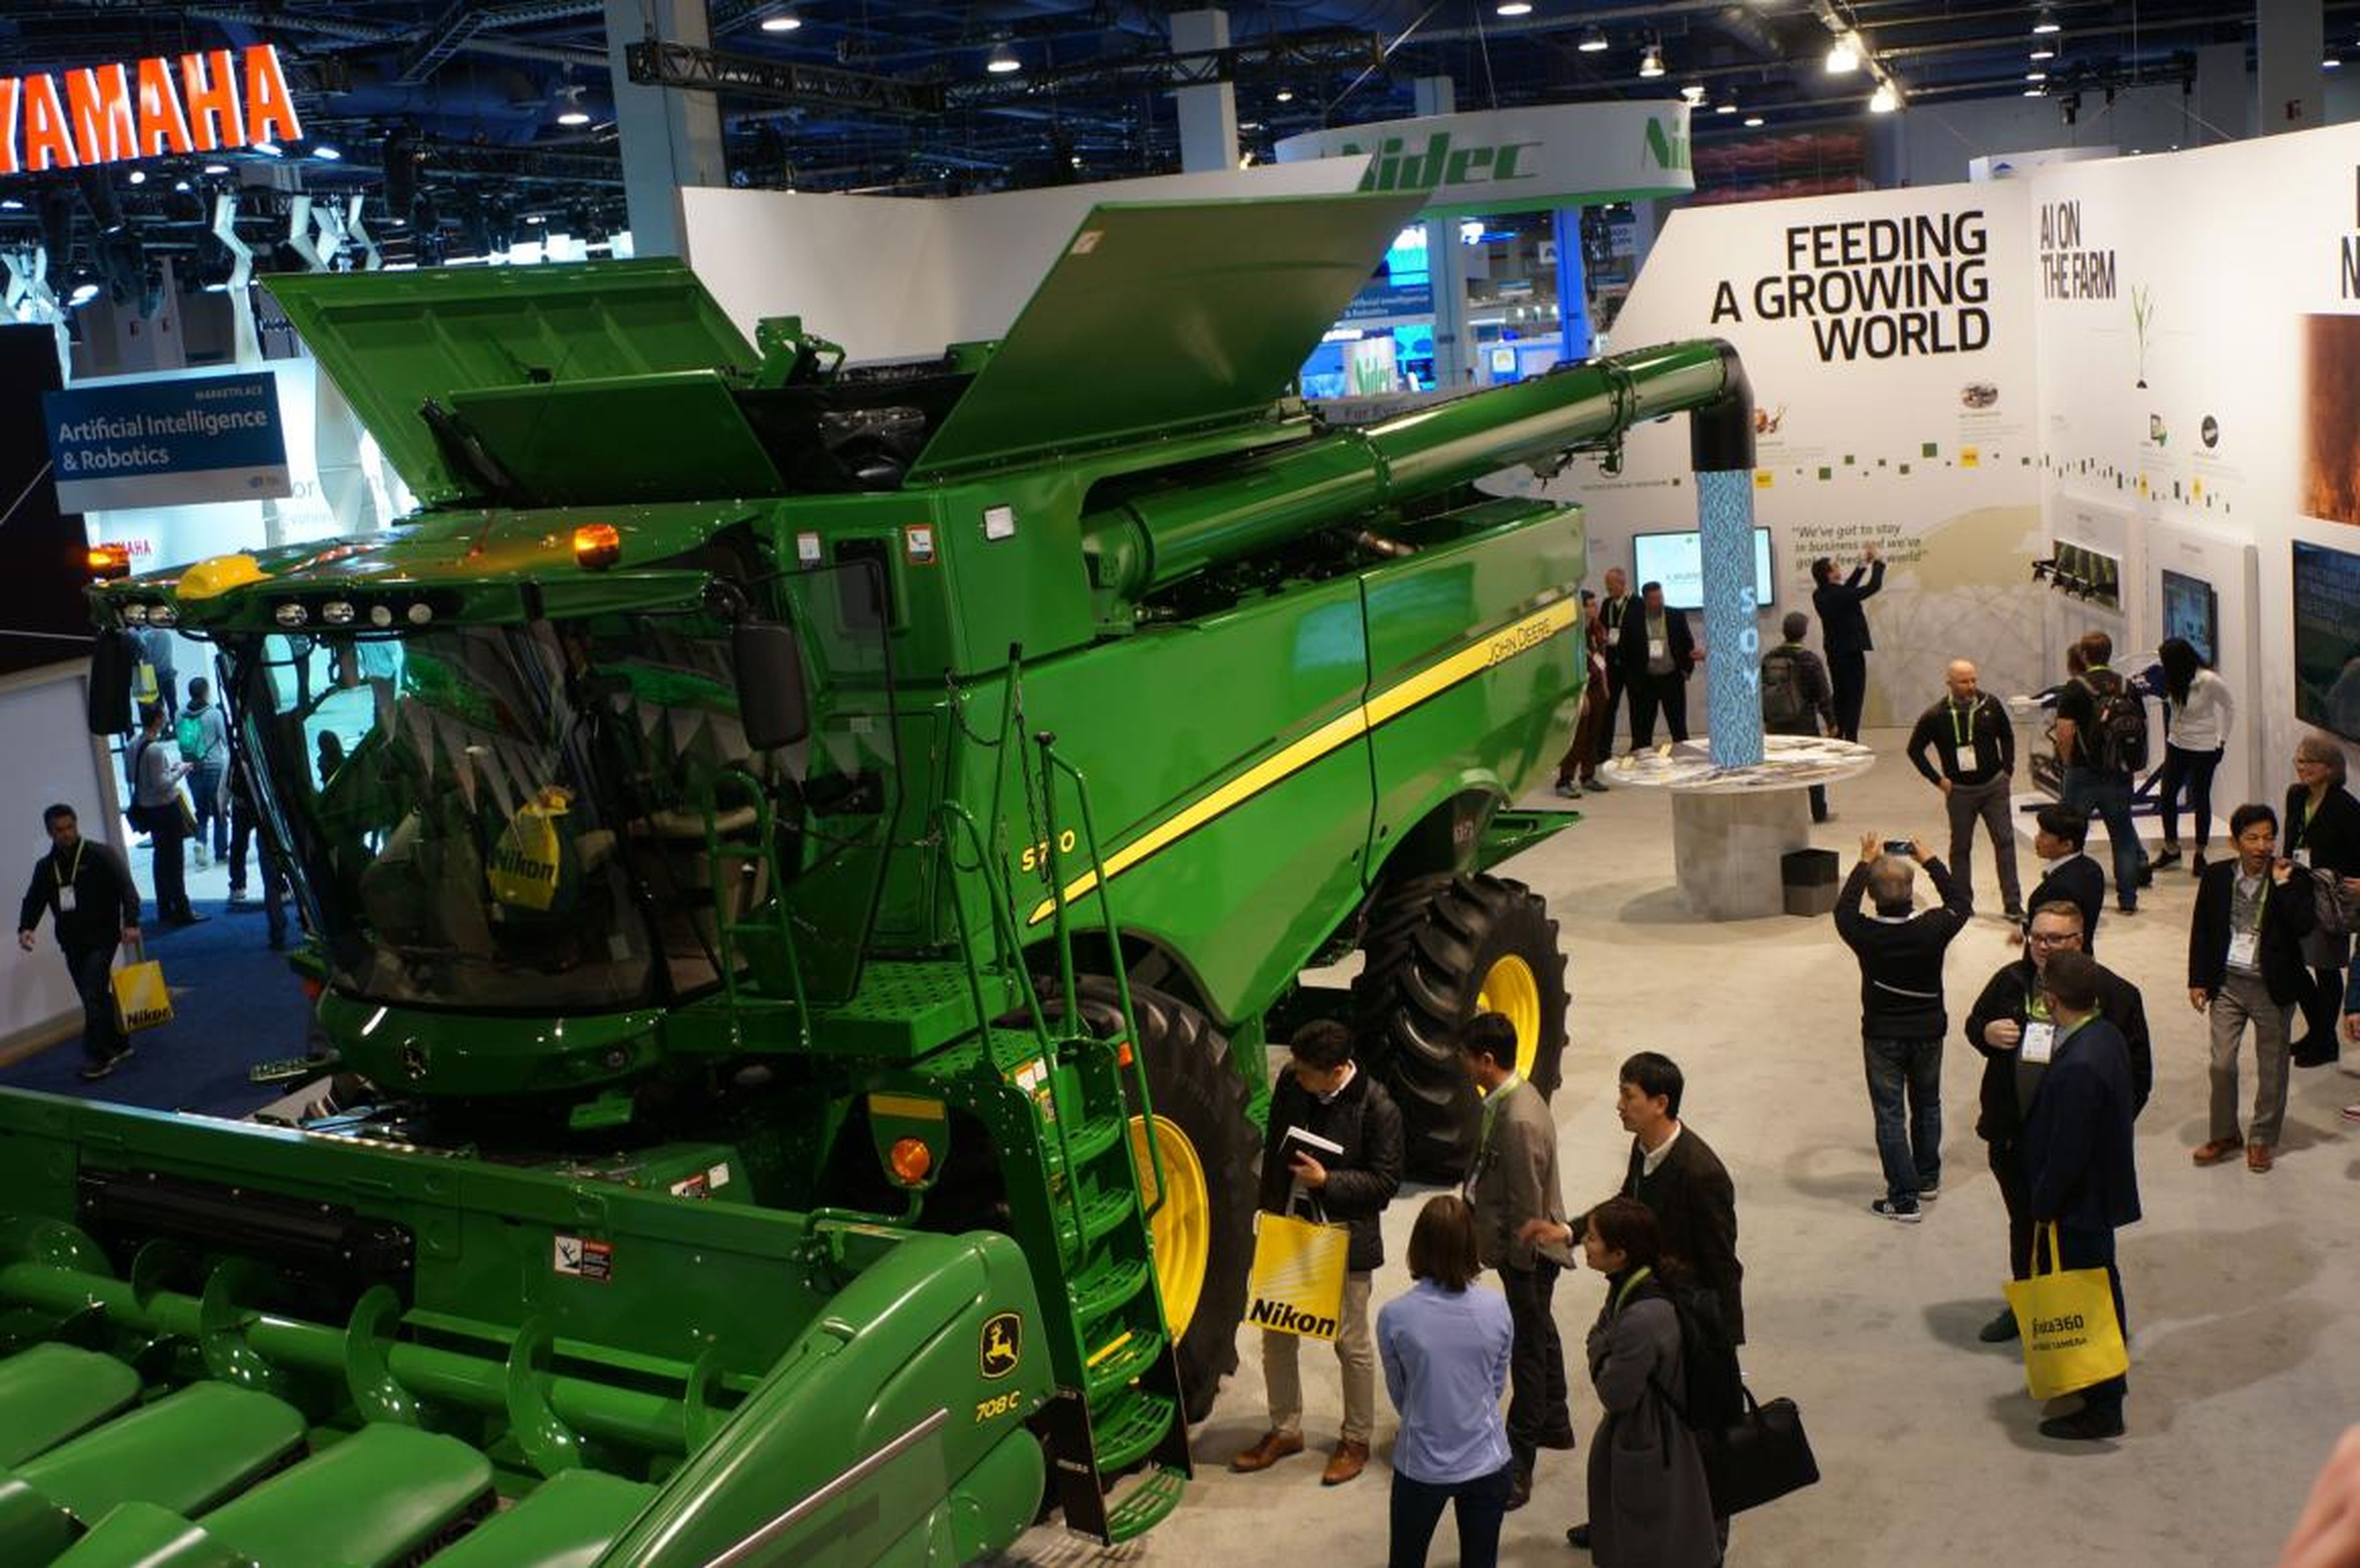 In John Deere's debut at CES, the company showcased its connected combine harvester that it describes as an "intelligent factory on wheels."